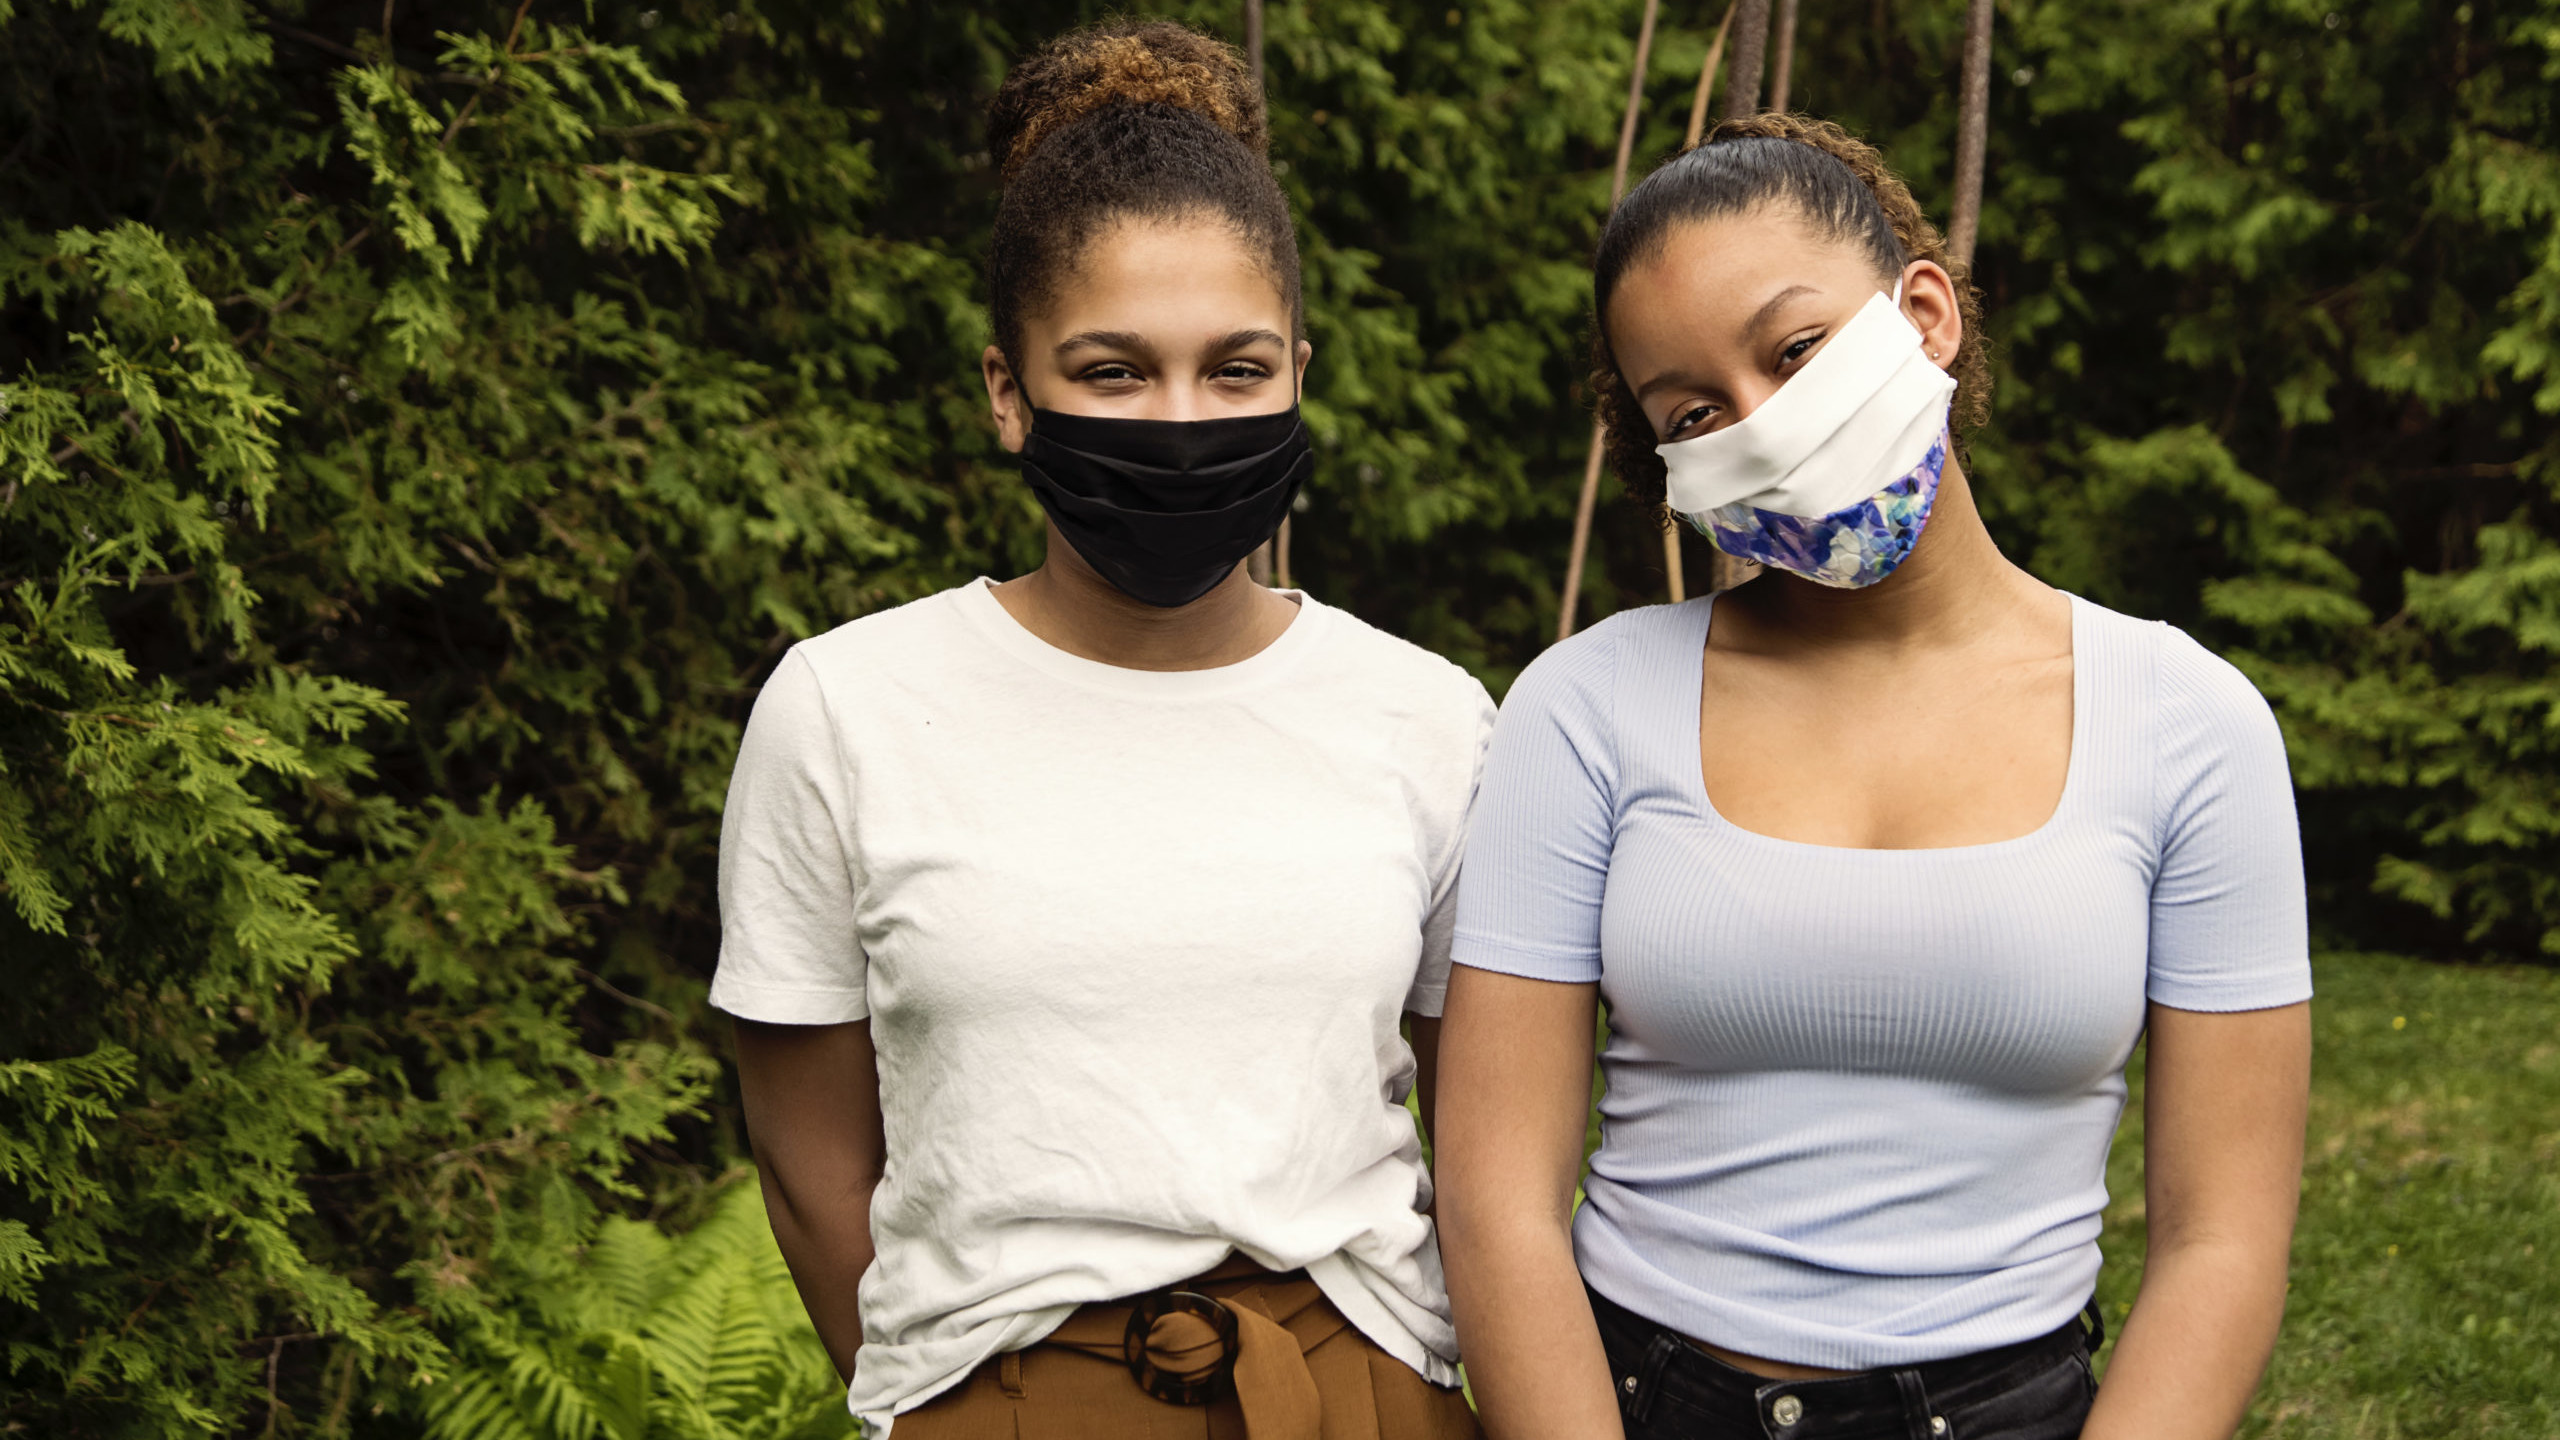 Two teenage sisters smiling behind their stylish protective black mask. They are mixed-race and looking at the camera. Nature in background. Horizontal outdoors waist up shot with copy space.